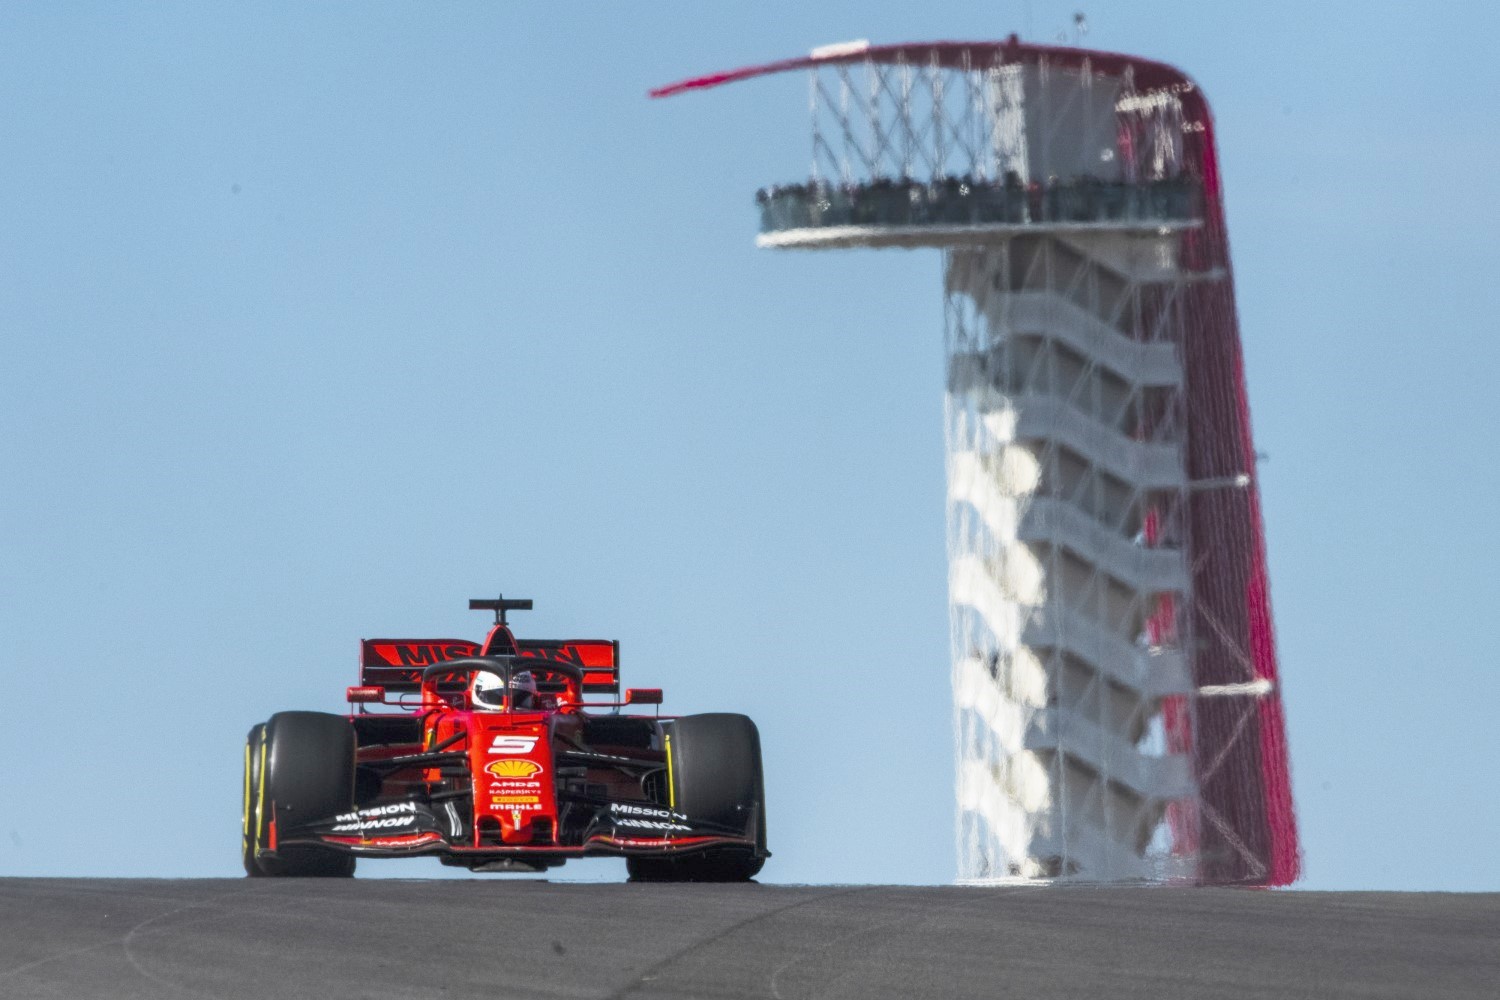 Vettel felt he was too conservative on his first run and that cost him the pole